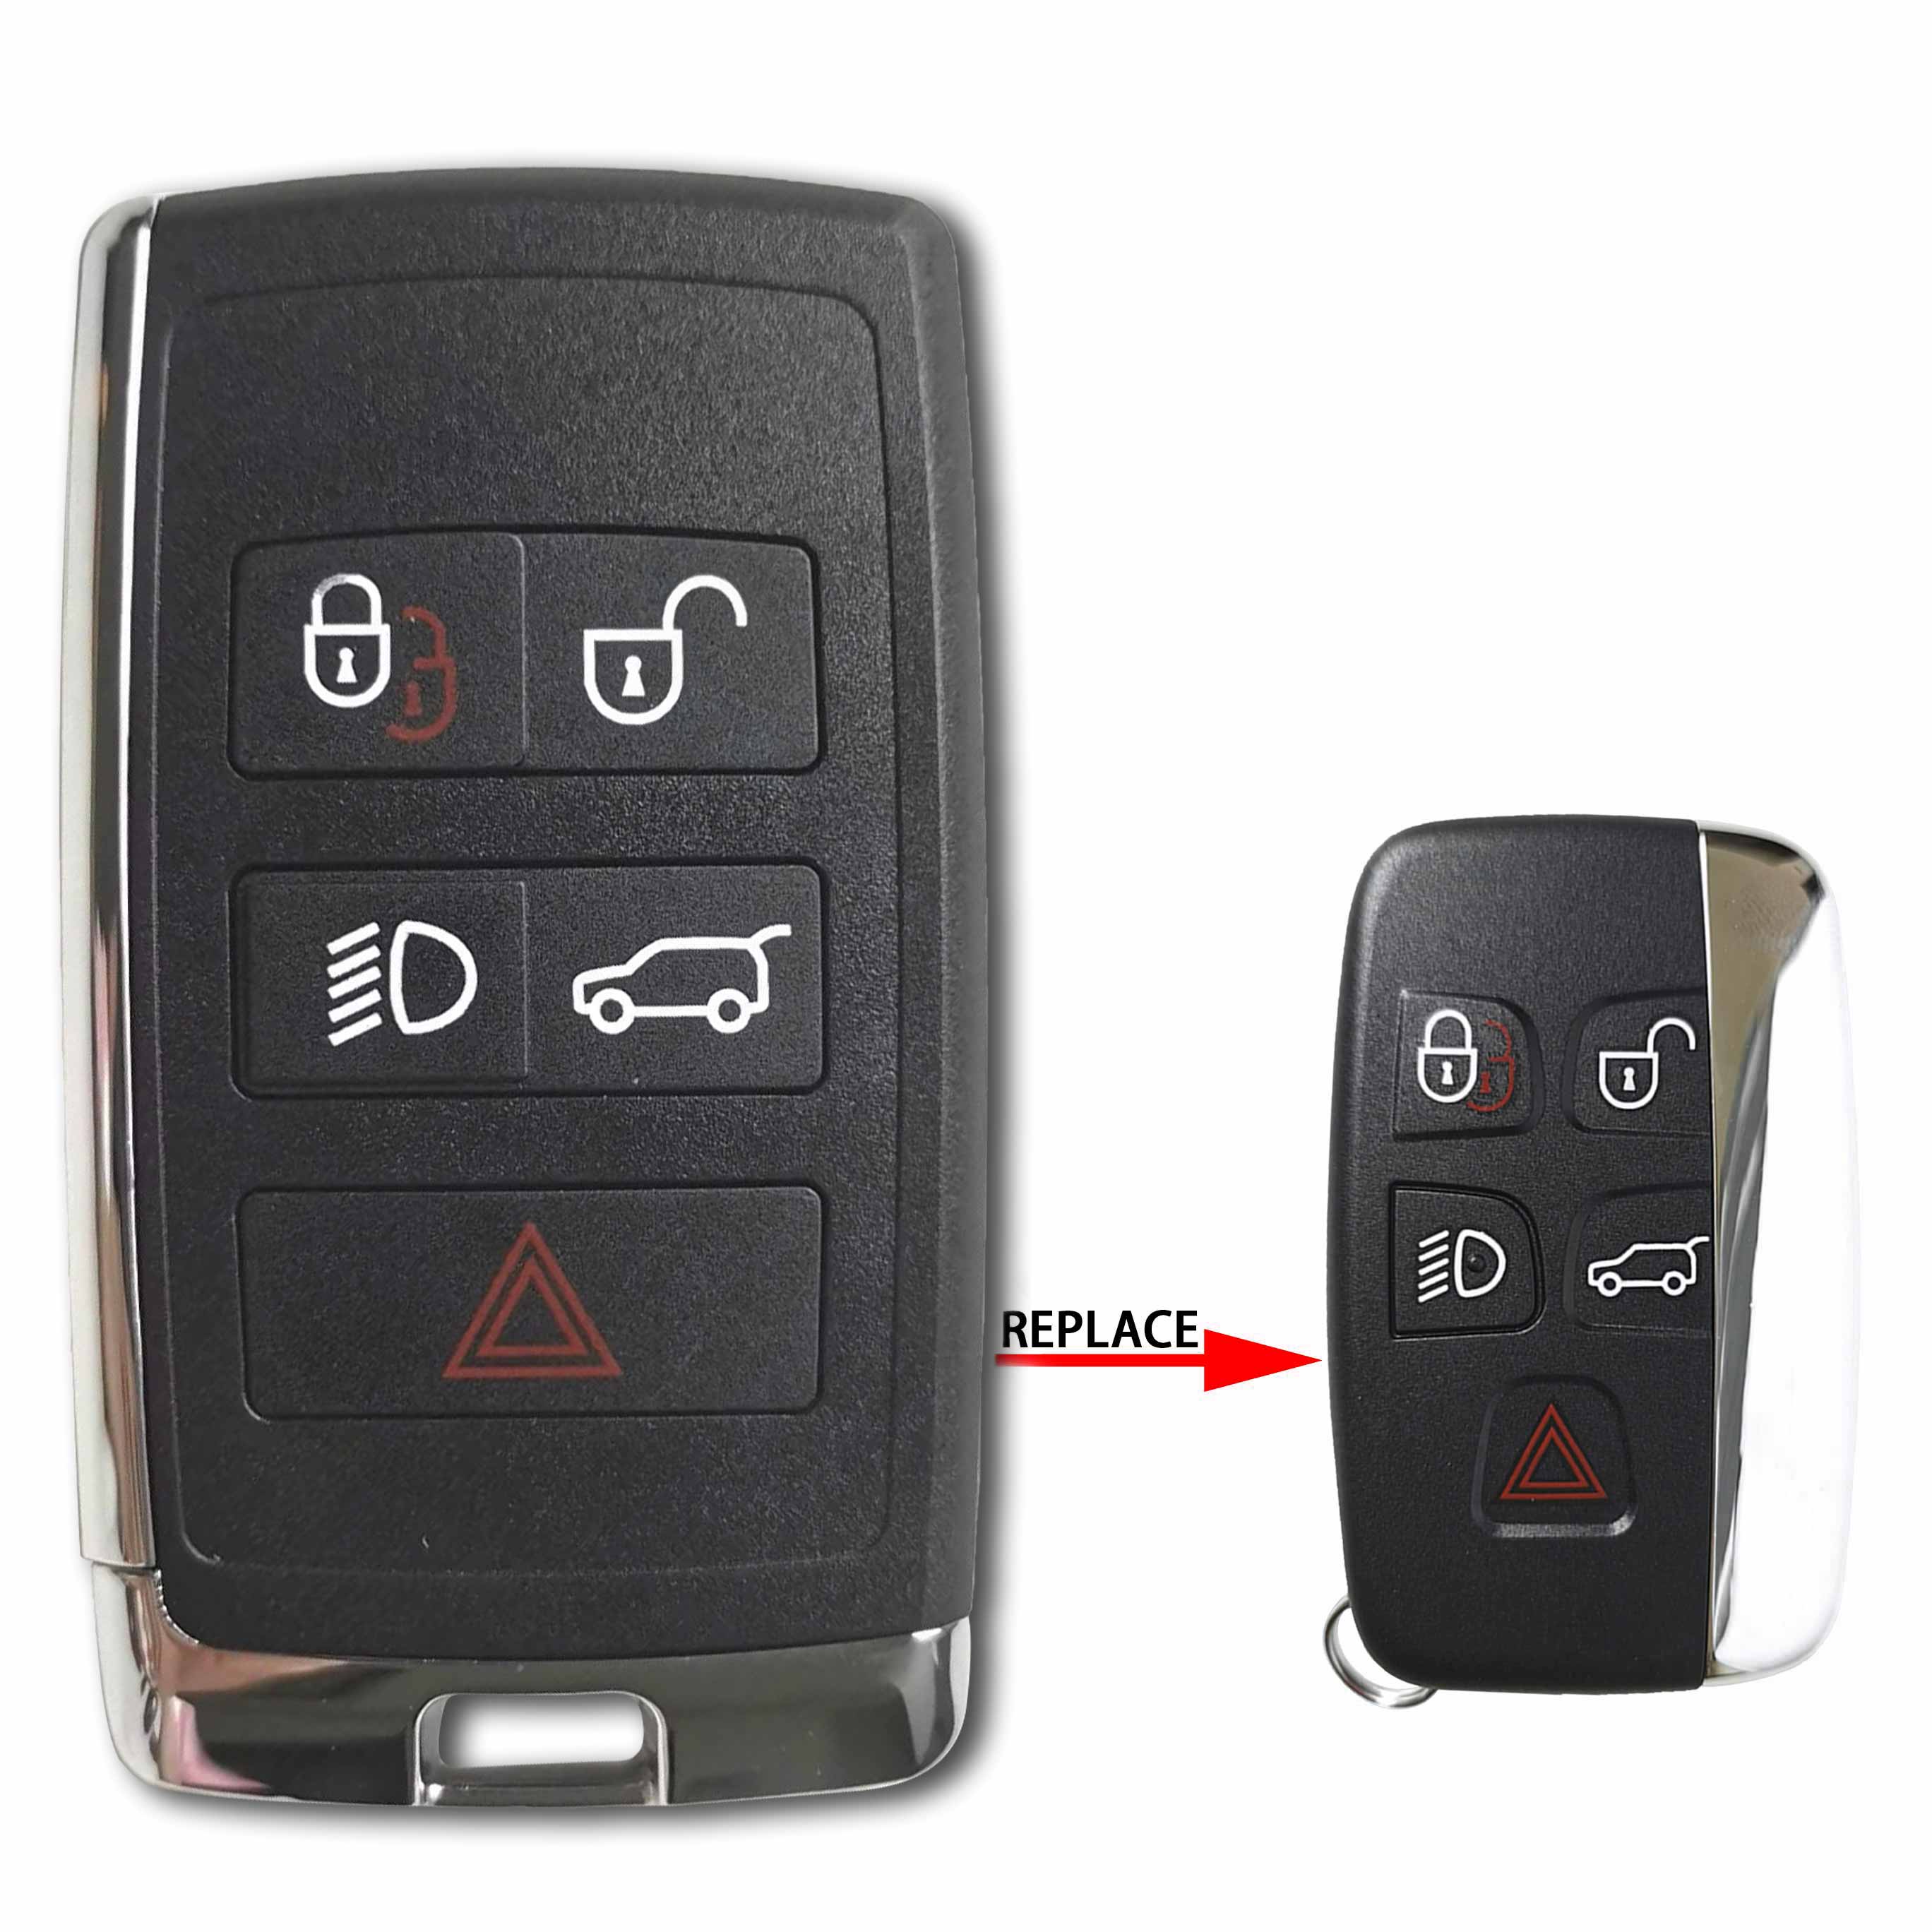 434 MHz Modified Smart Key for 2010 ~ 2015 Range Rover